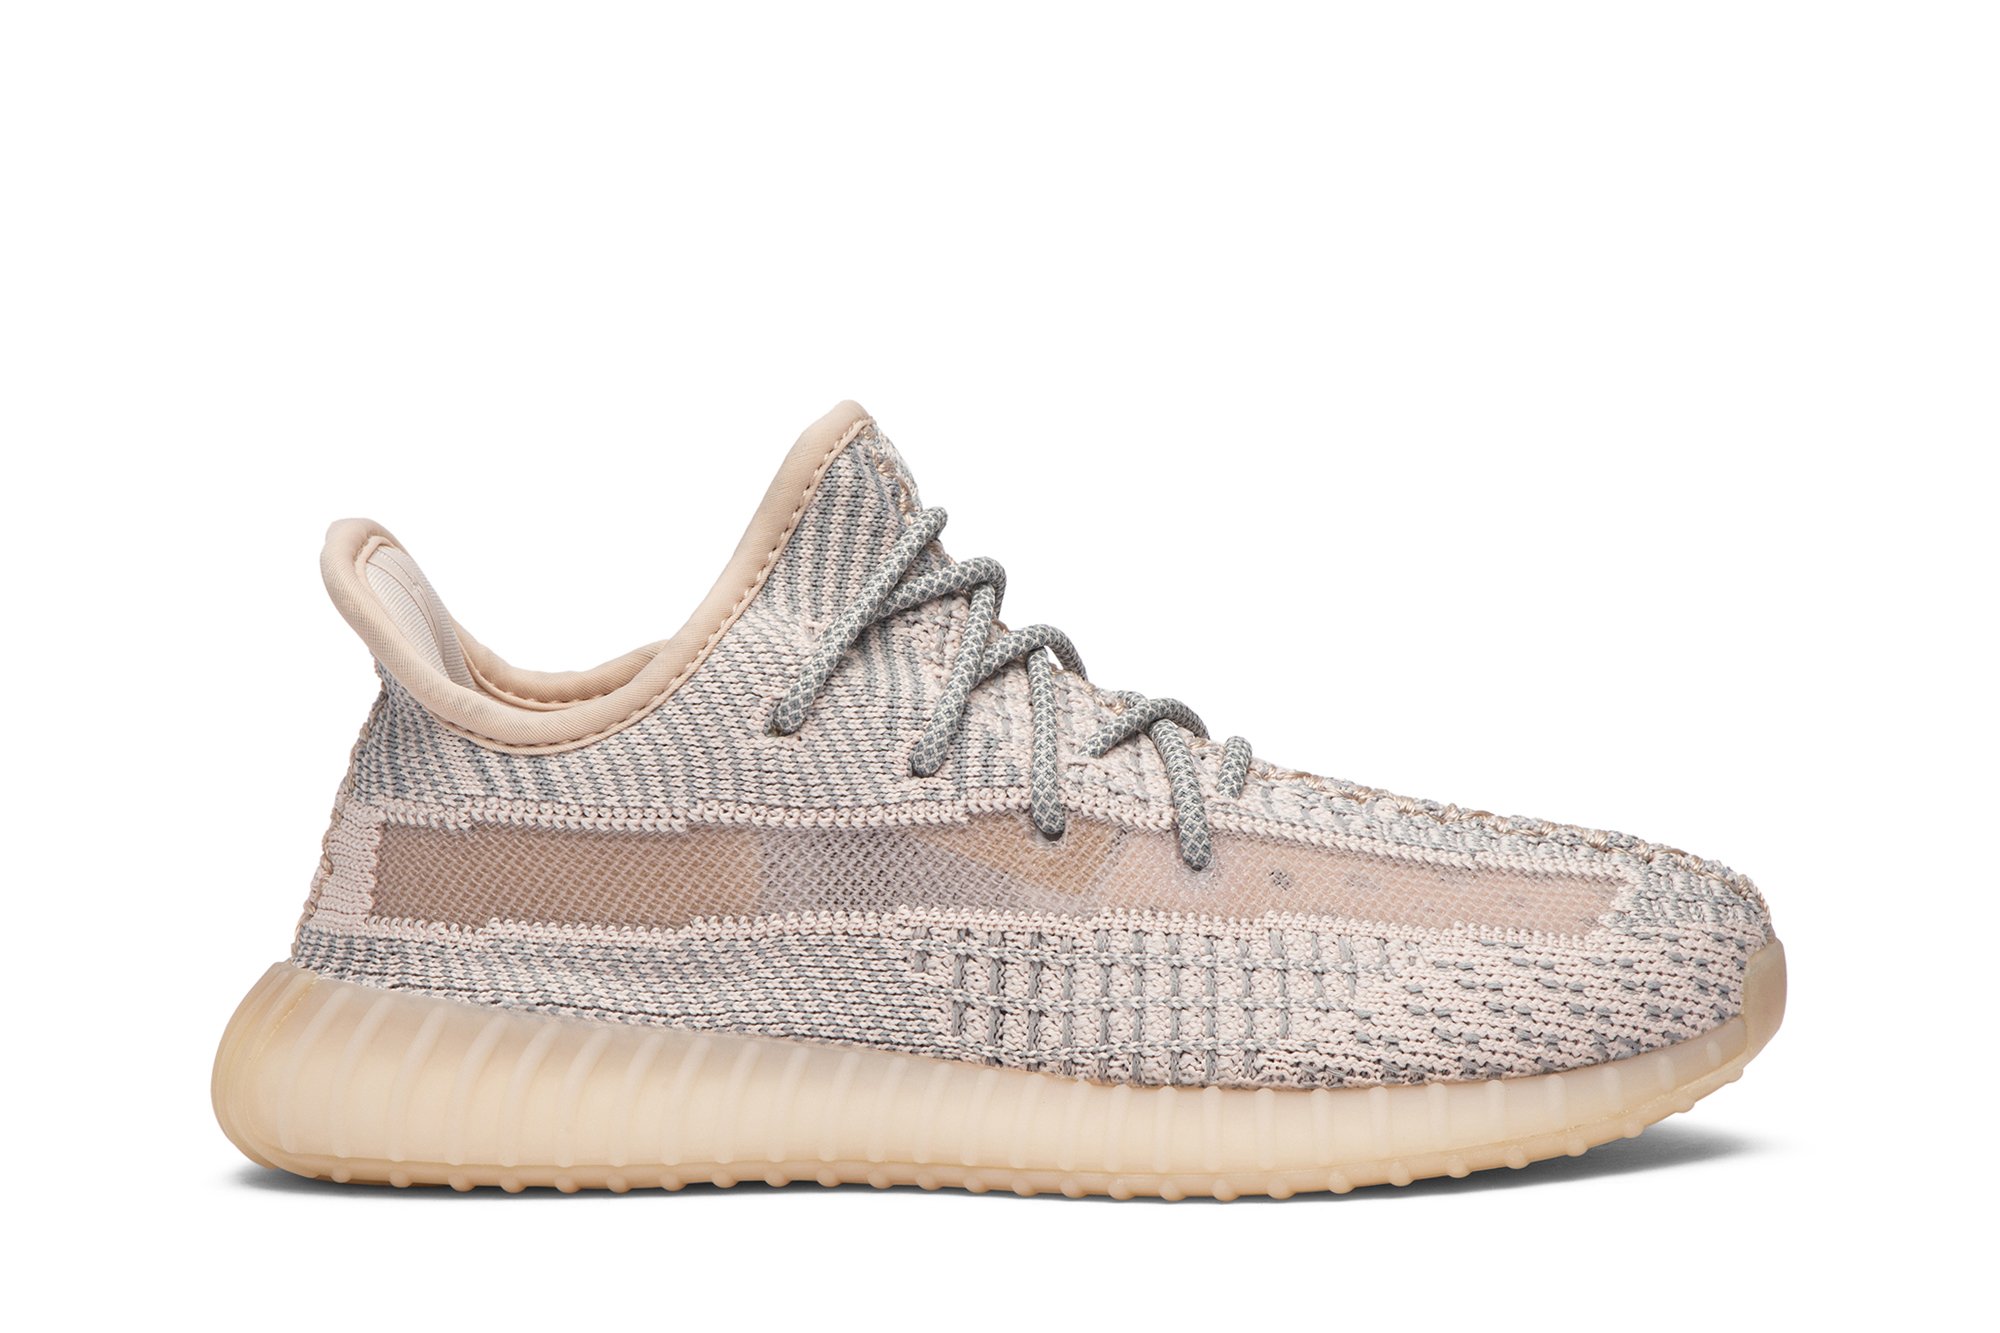 Yeezy Boost 350 V2 Kids 'Synth'